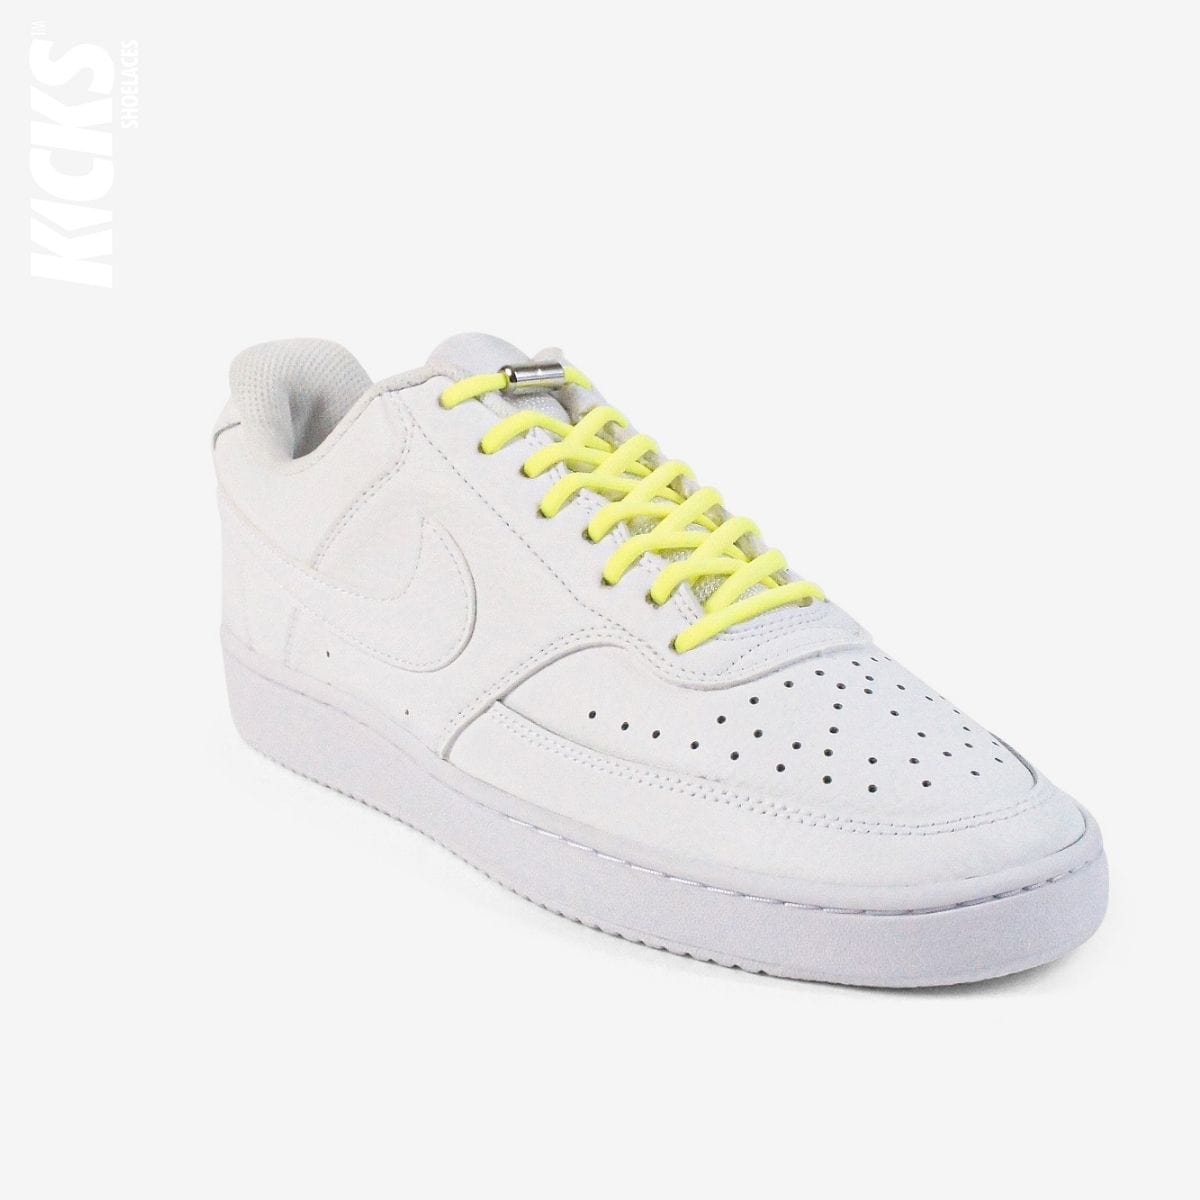 round-no-tie-shoelaces-with-lemon-yellow-laces-on-nike-white-sneakers-by-kicks-shoelaces